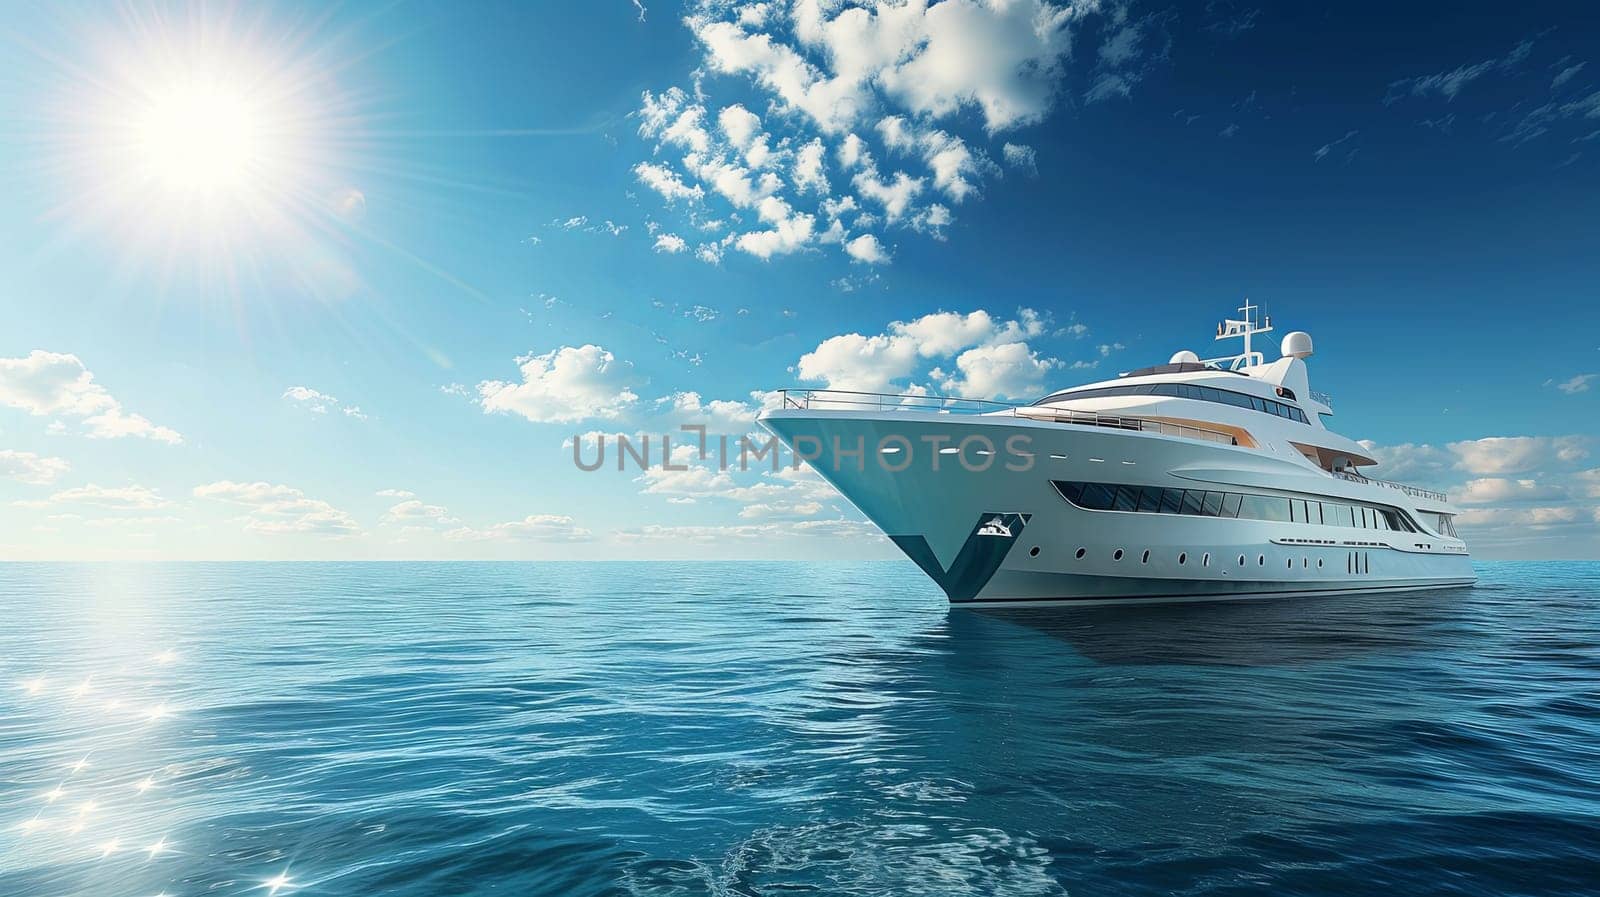 A large white yacht peacefully glides through the vast ocean, surrounded by nothing but water.